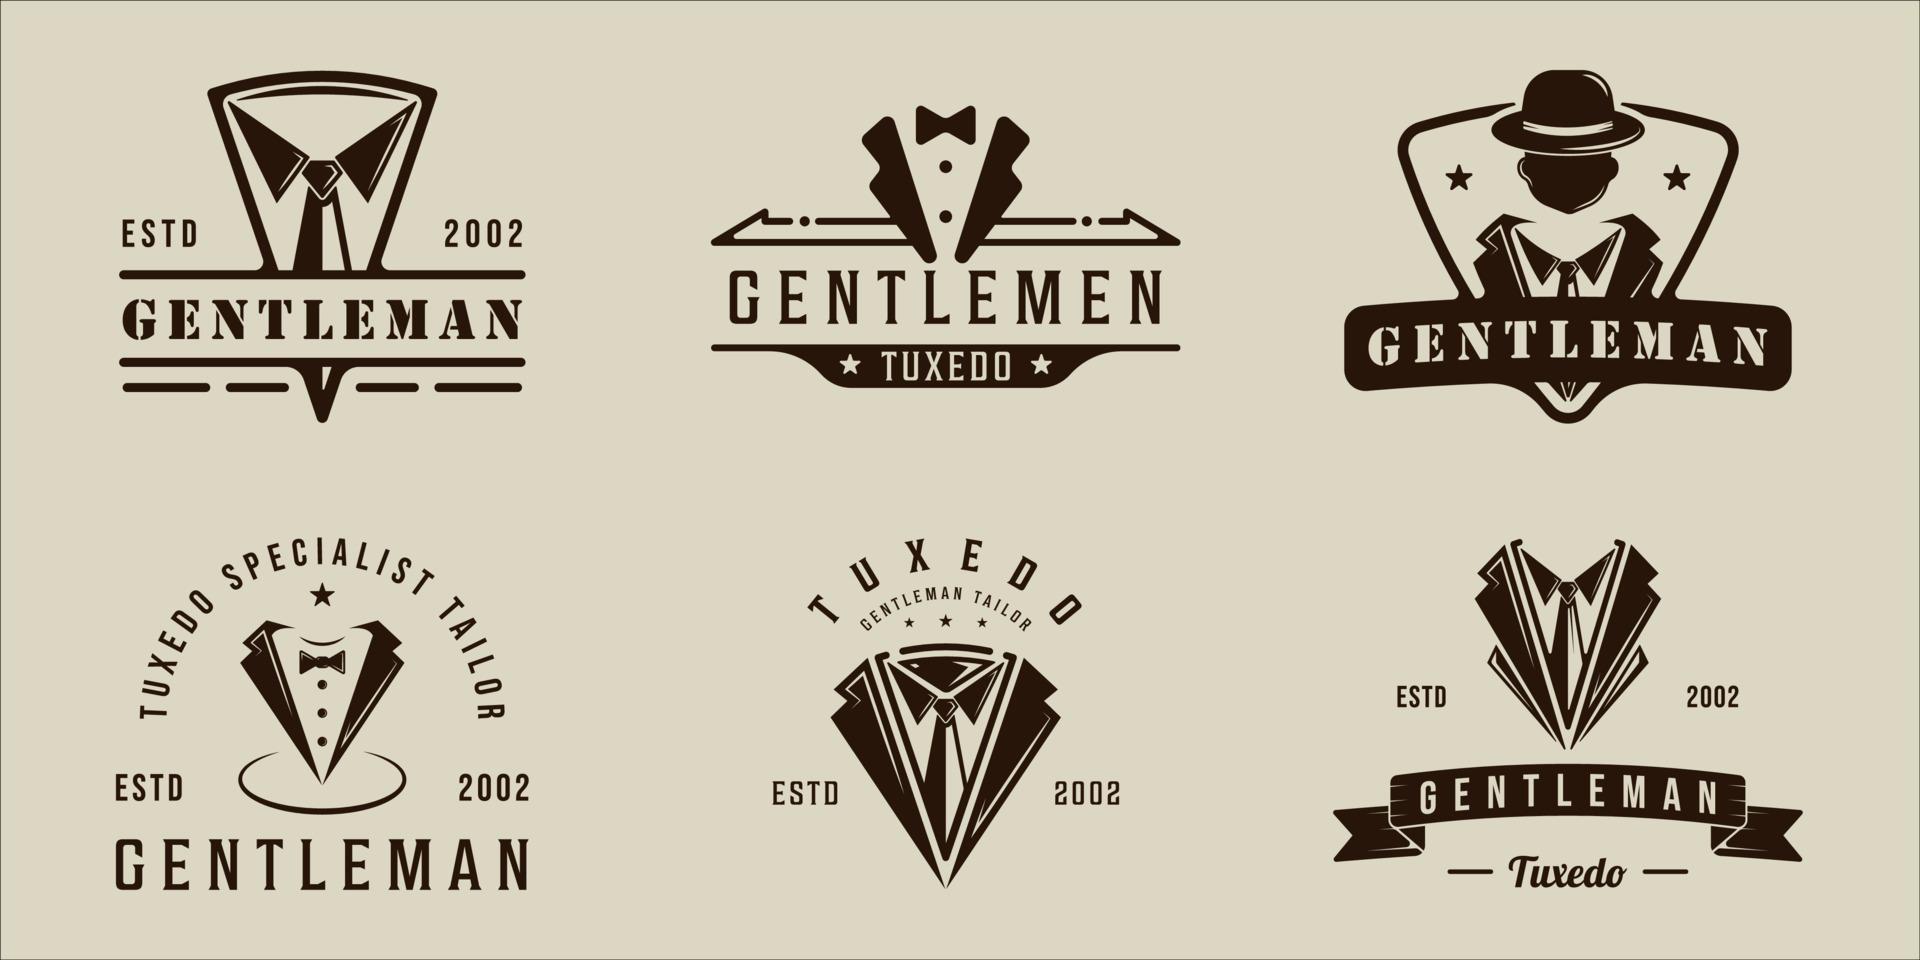 set of tie tuxedo logo vector vintage illustration template icon graphic design. bundle collection of various suit masculine and gentleman fashion sign or symbol for professional tailor or designer